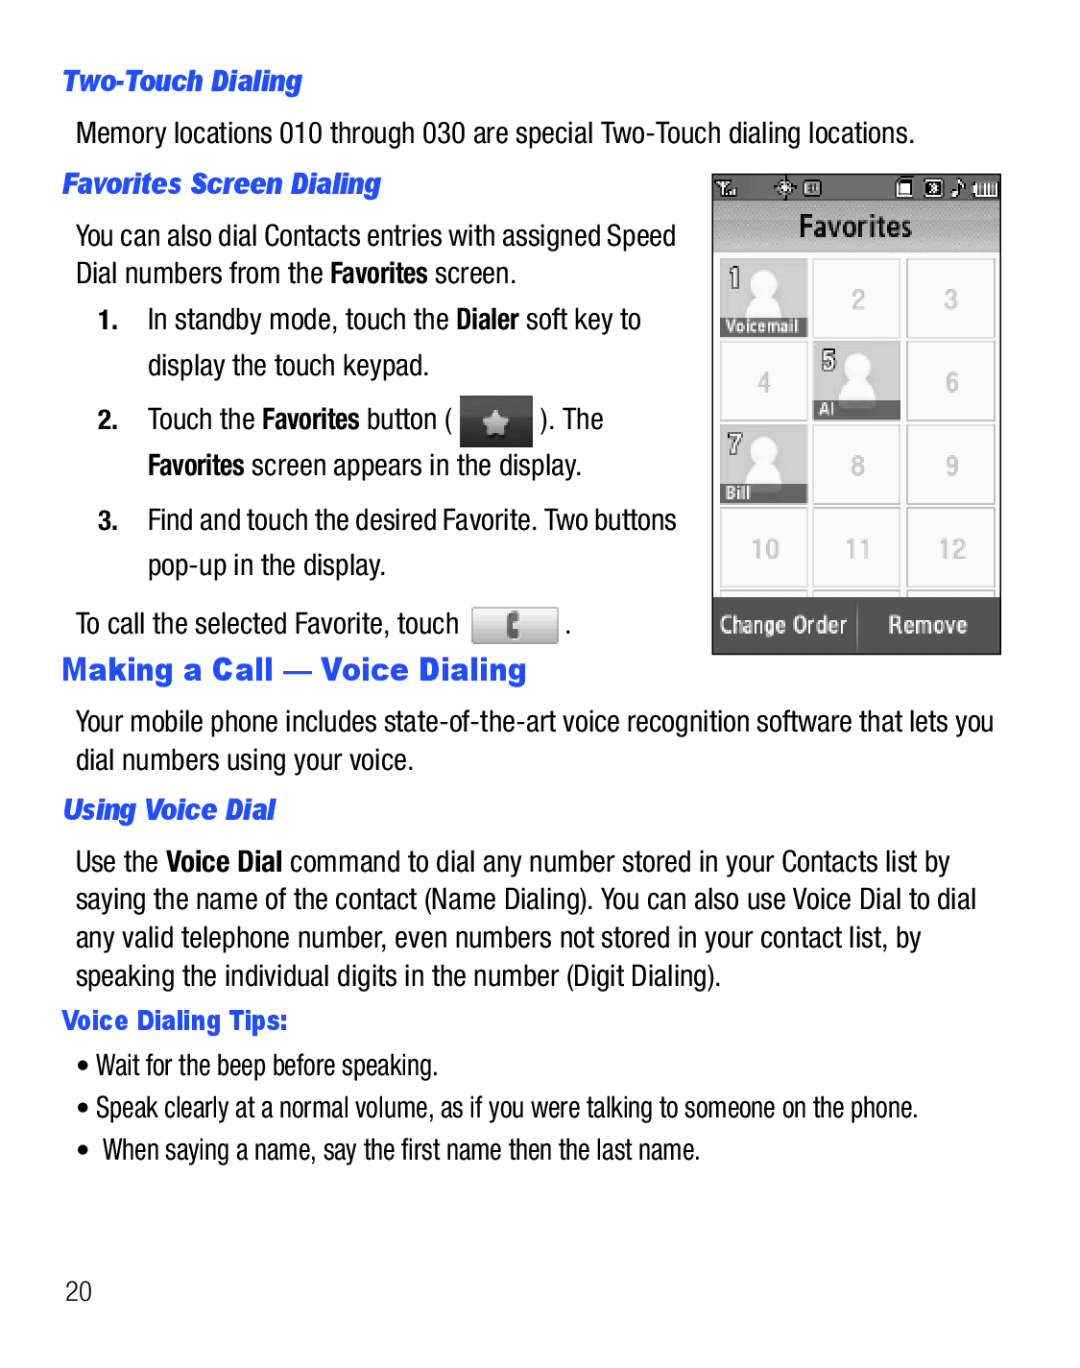 Samsung GH68-25119A Making a Call - Voice Dialing, Two-Touch Dialing, Favorites Screen Dialing, Using Voice Dial 